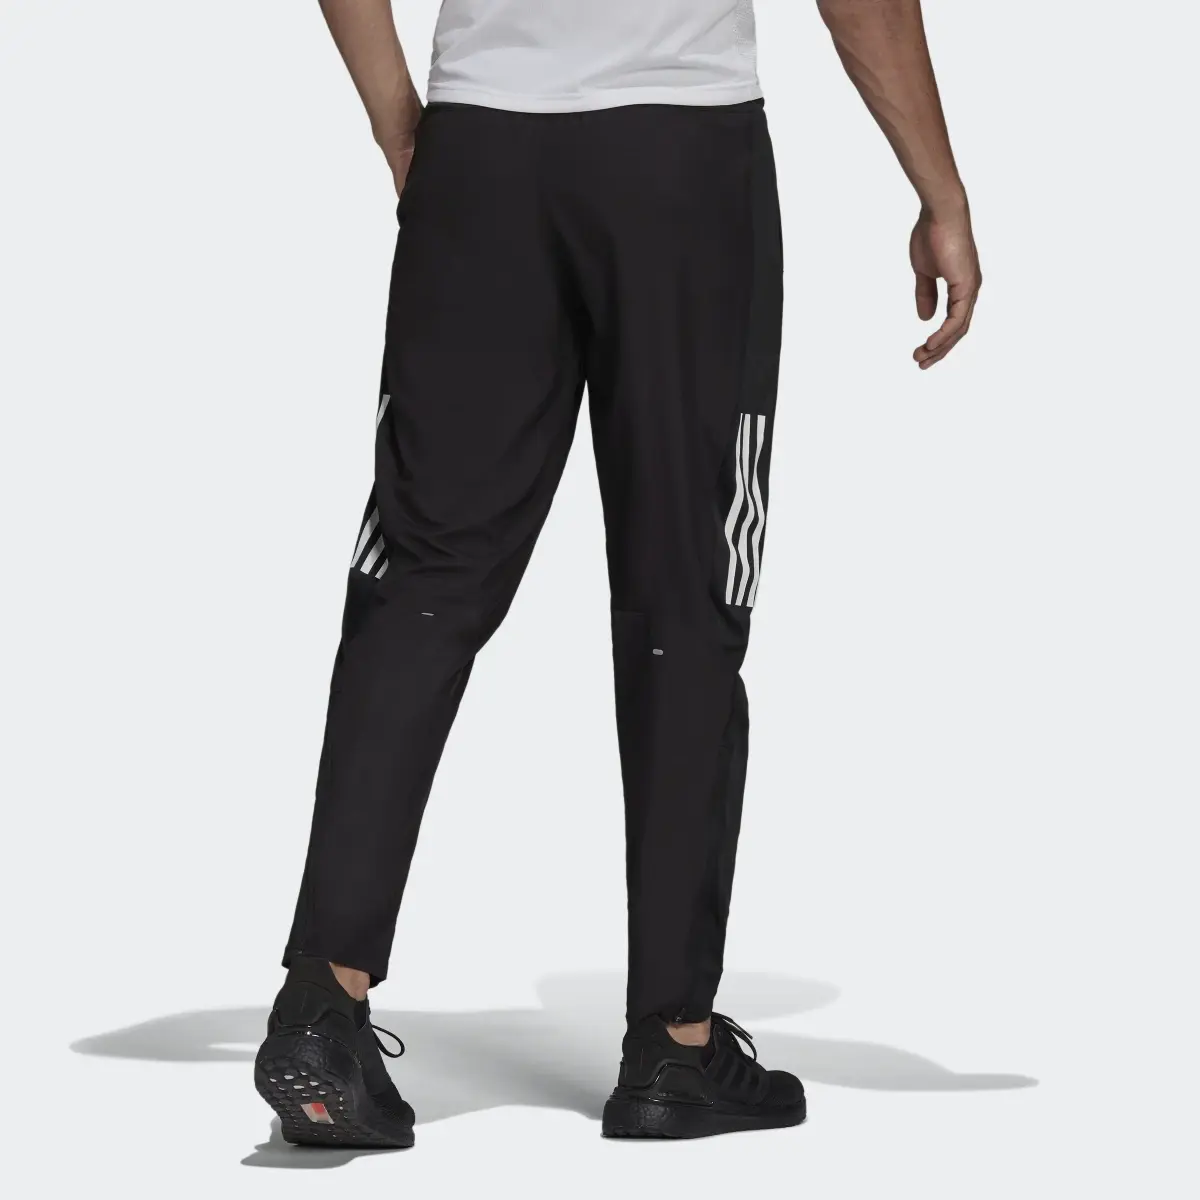 Adidas Own The Run Astro Wind Joggers. 3